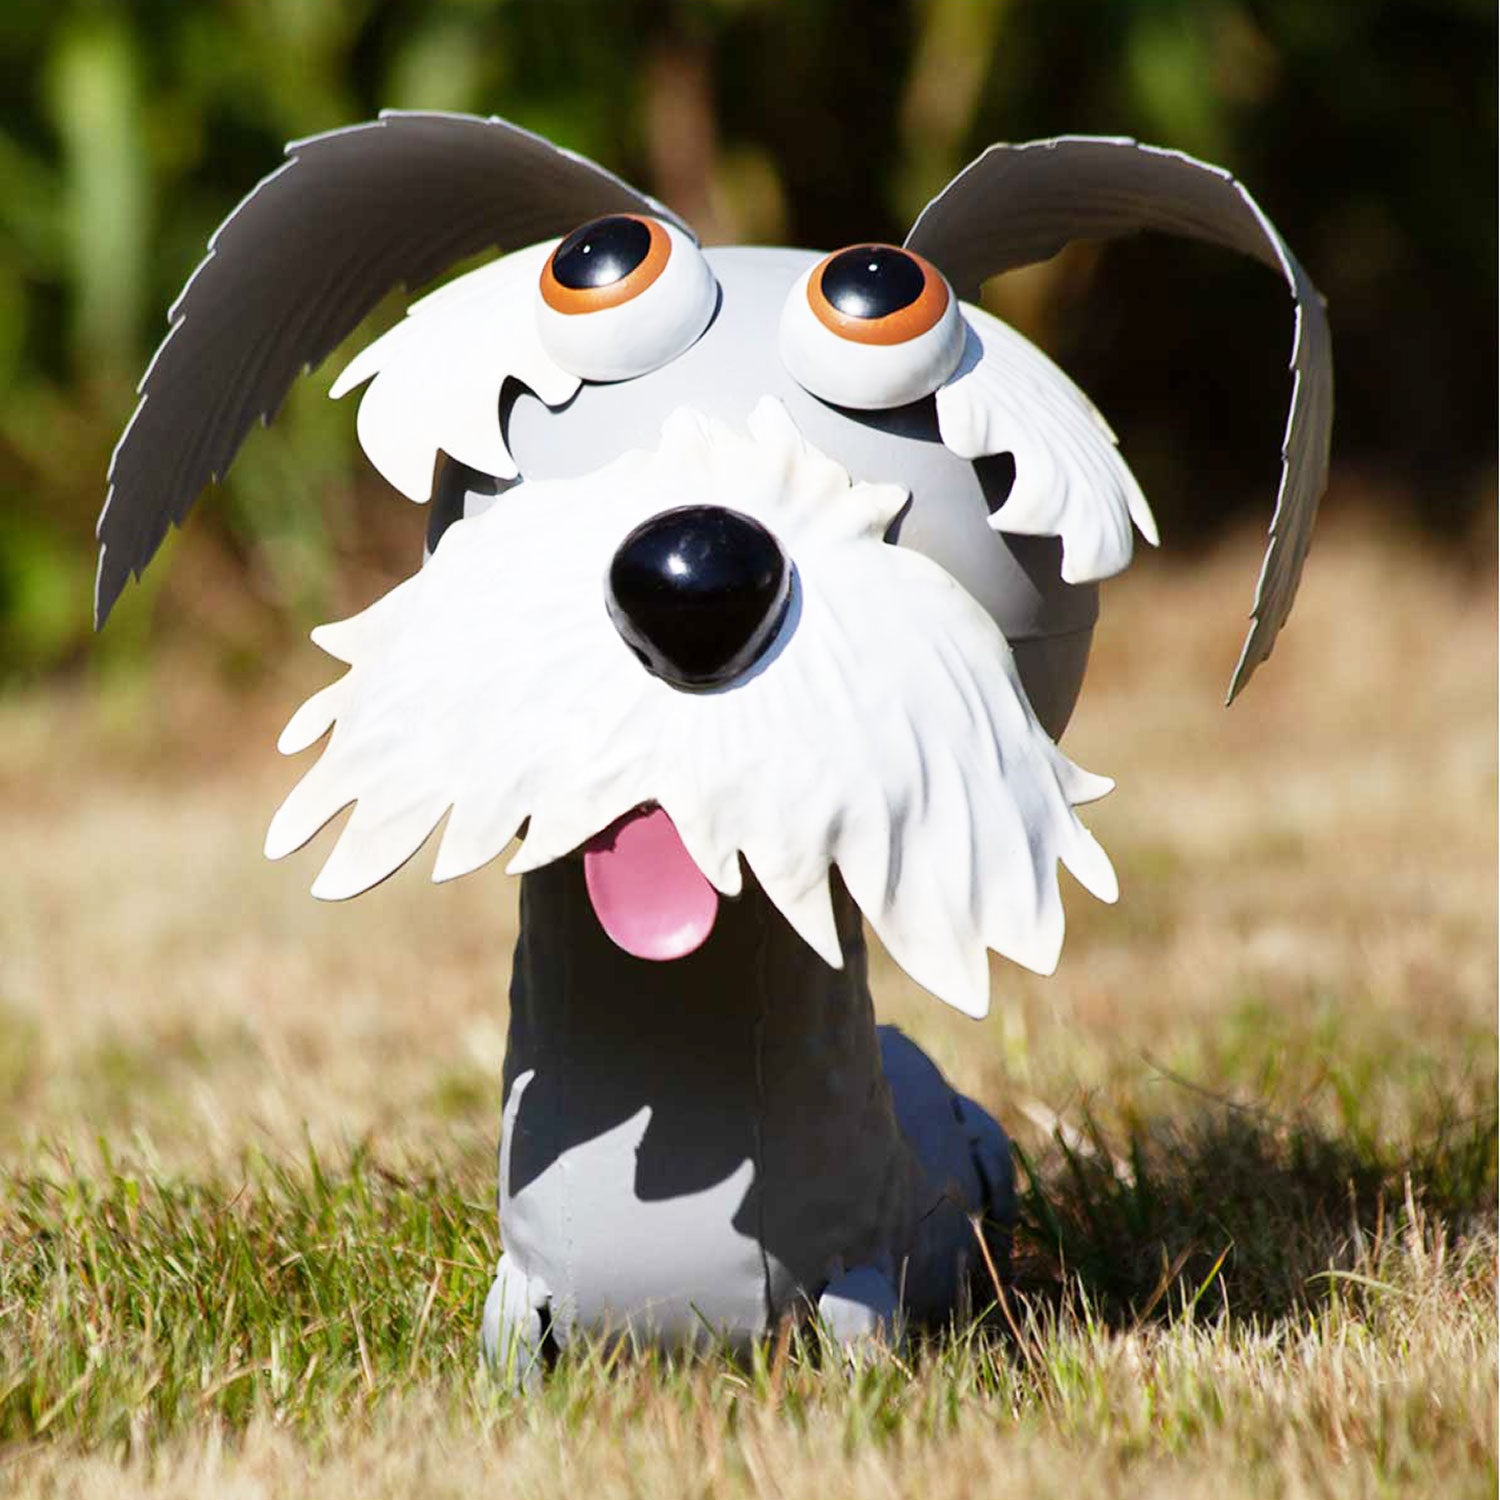 Dog Lover Gifts available at Dog Krazy Gifts – Bobble Buddies Schnauzer, available at www.dogkrazygifts.co.uk